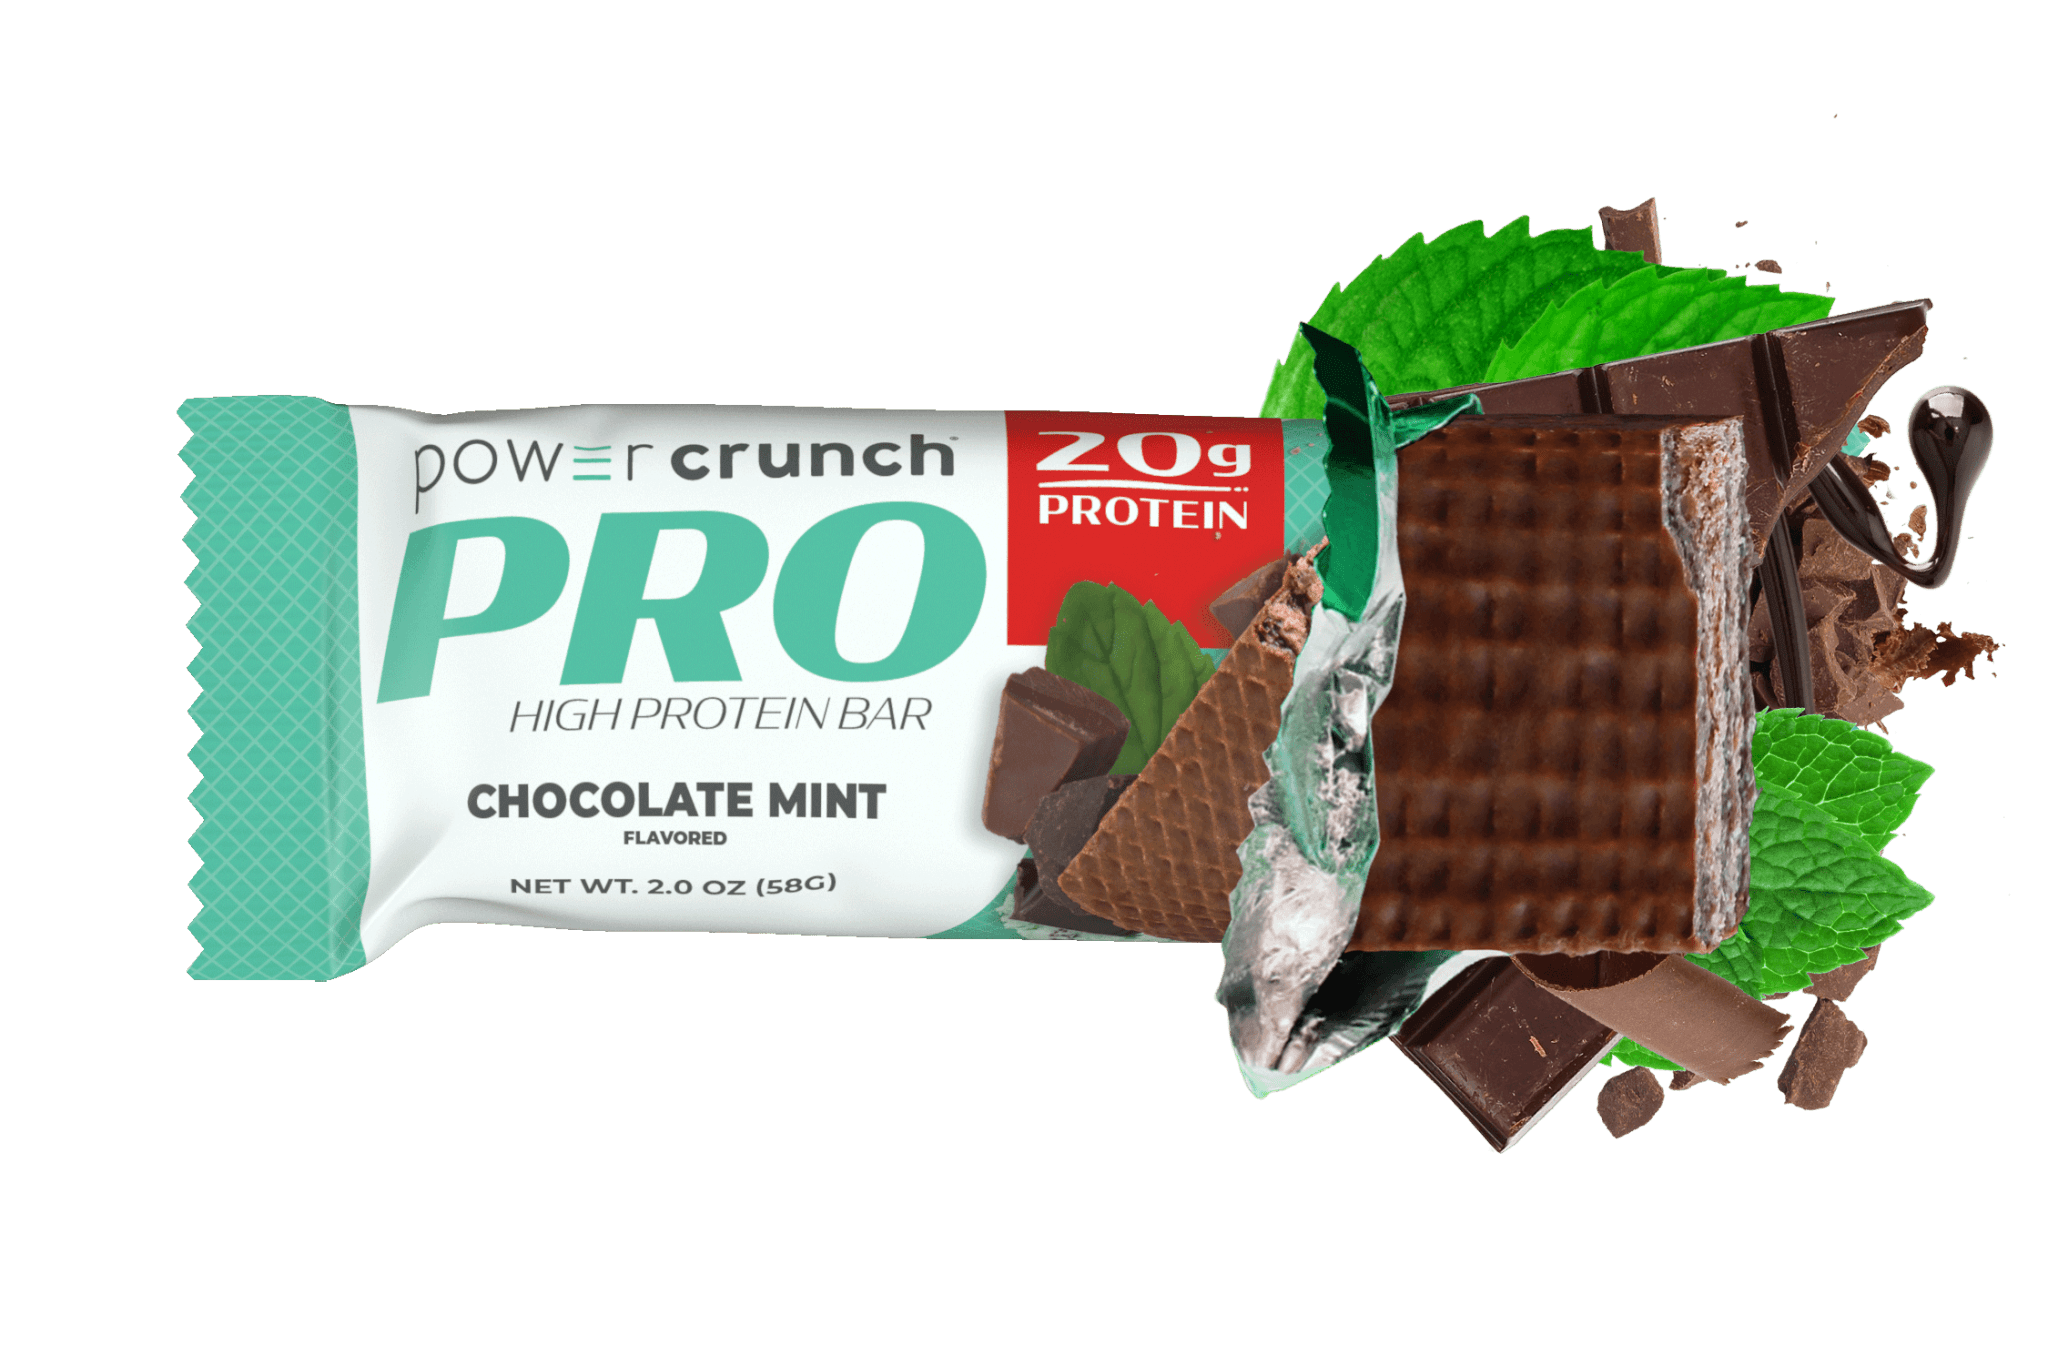 Power Crunch PRO Chocolate Mint 20g protein bars pictured with Chocolate Mint flavor explosion